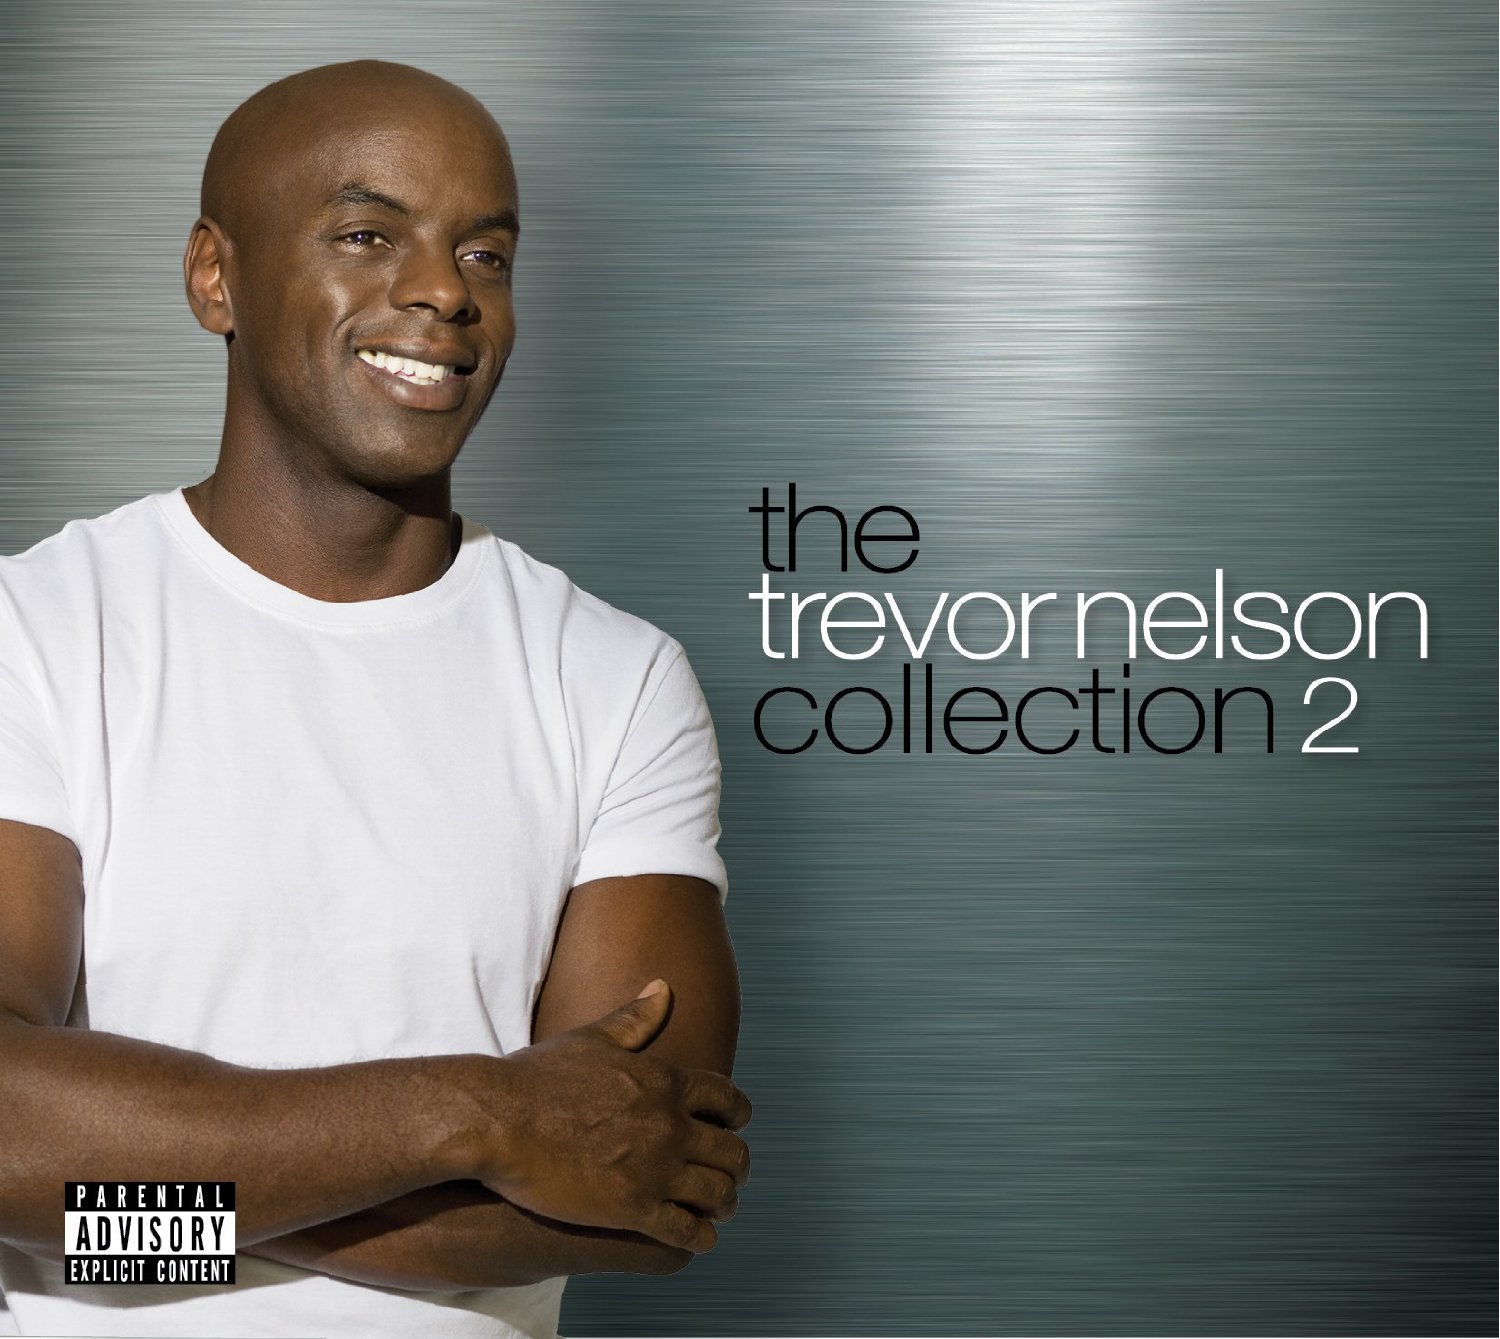 THE TREVOR NELSON COLLECTION 2 cover art